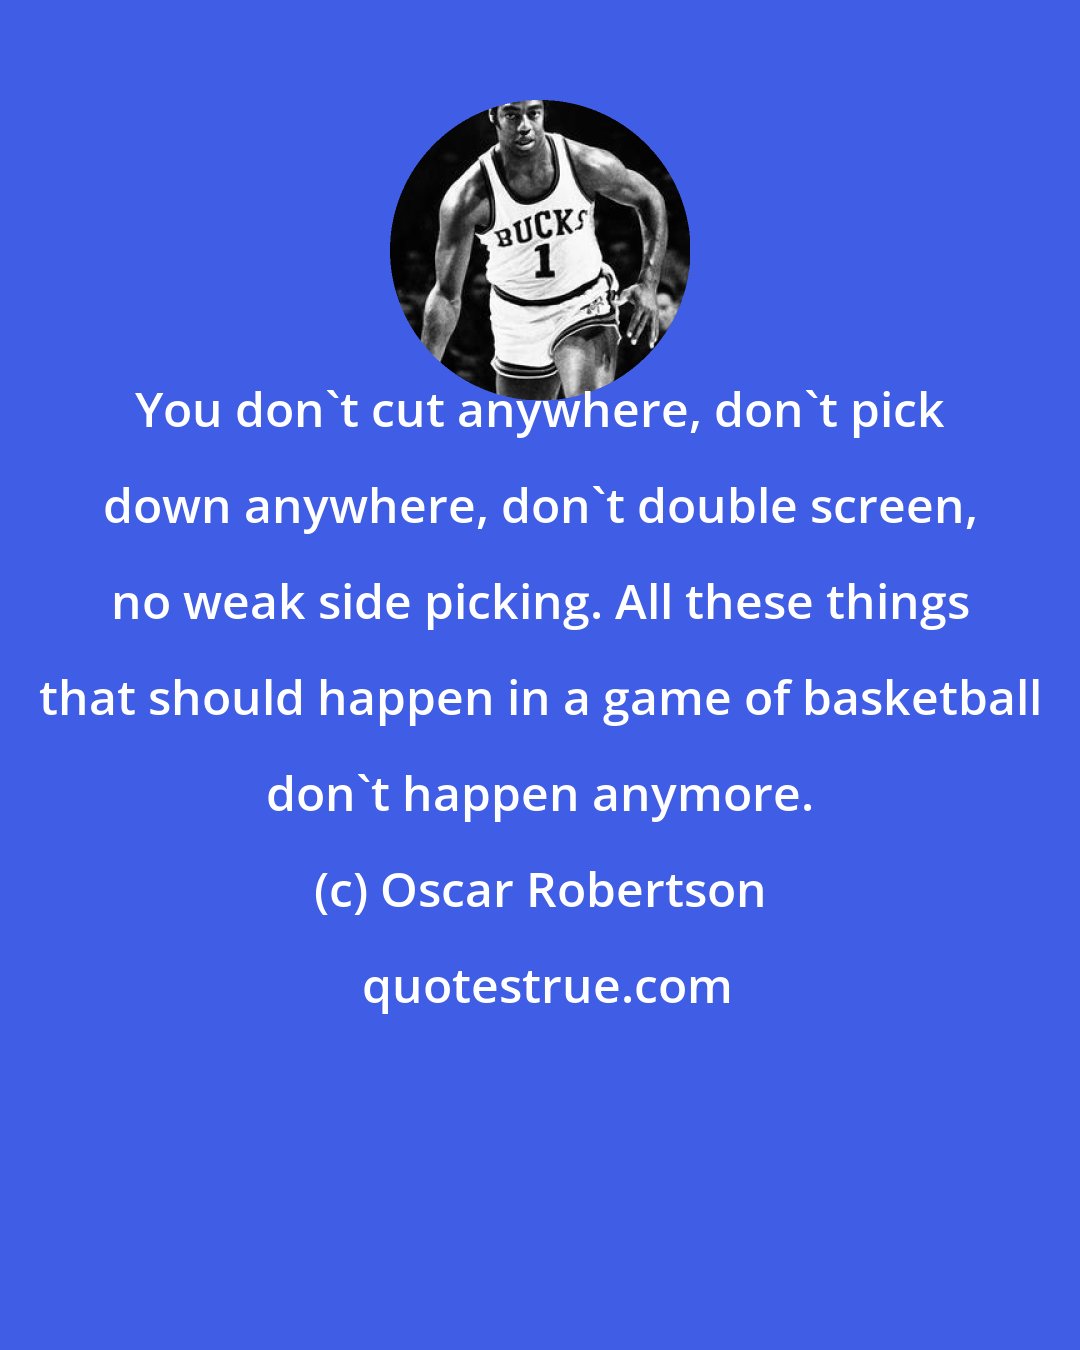 Oscar Robertson: You don't cut anywhere, don't pick down anywhere, don't double screen, no weak side picking. All these things that should happen in a game of basketball don't happen anymore.